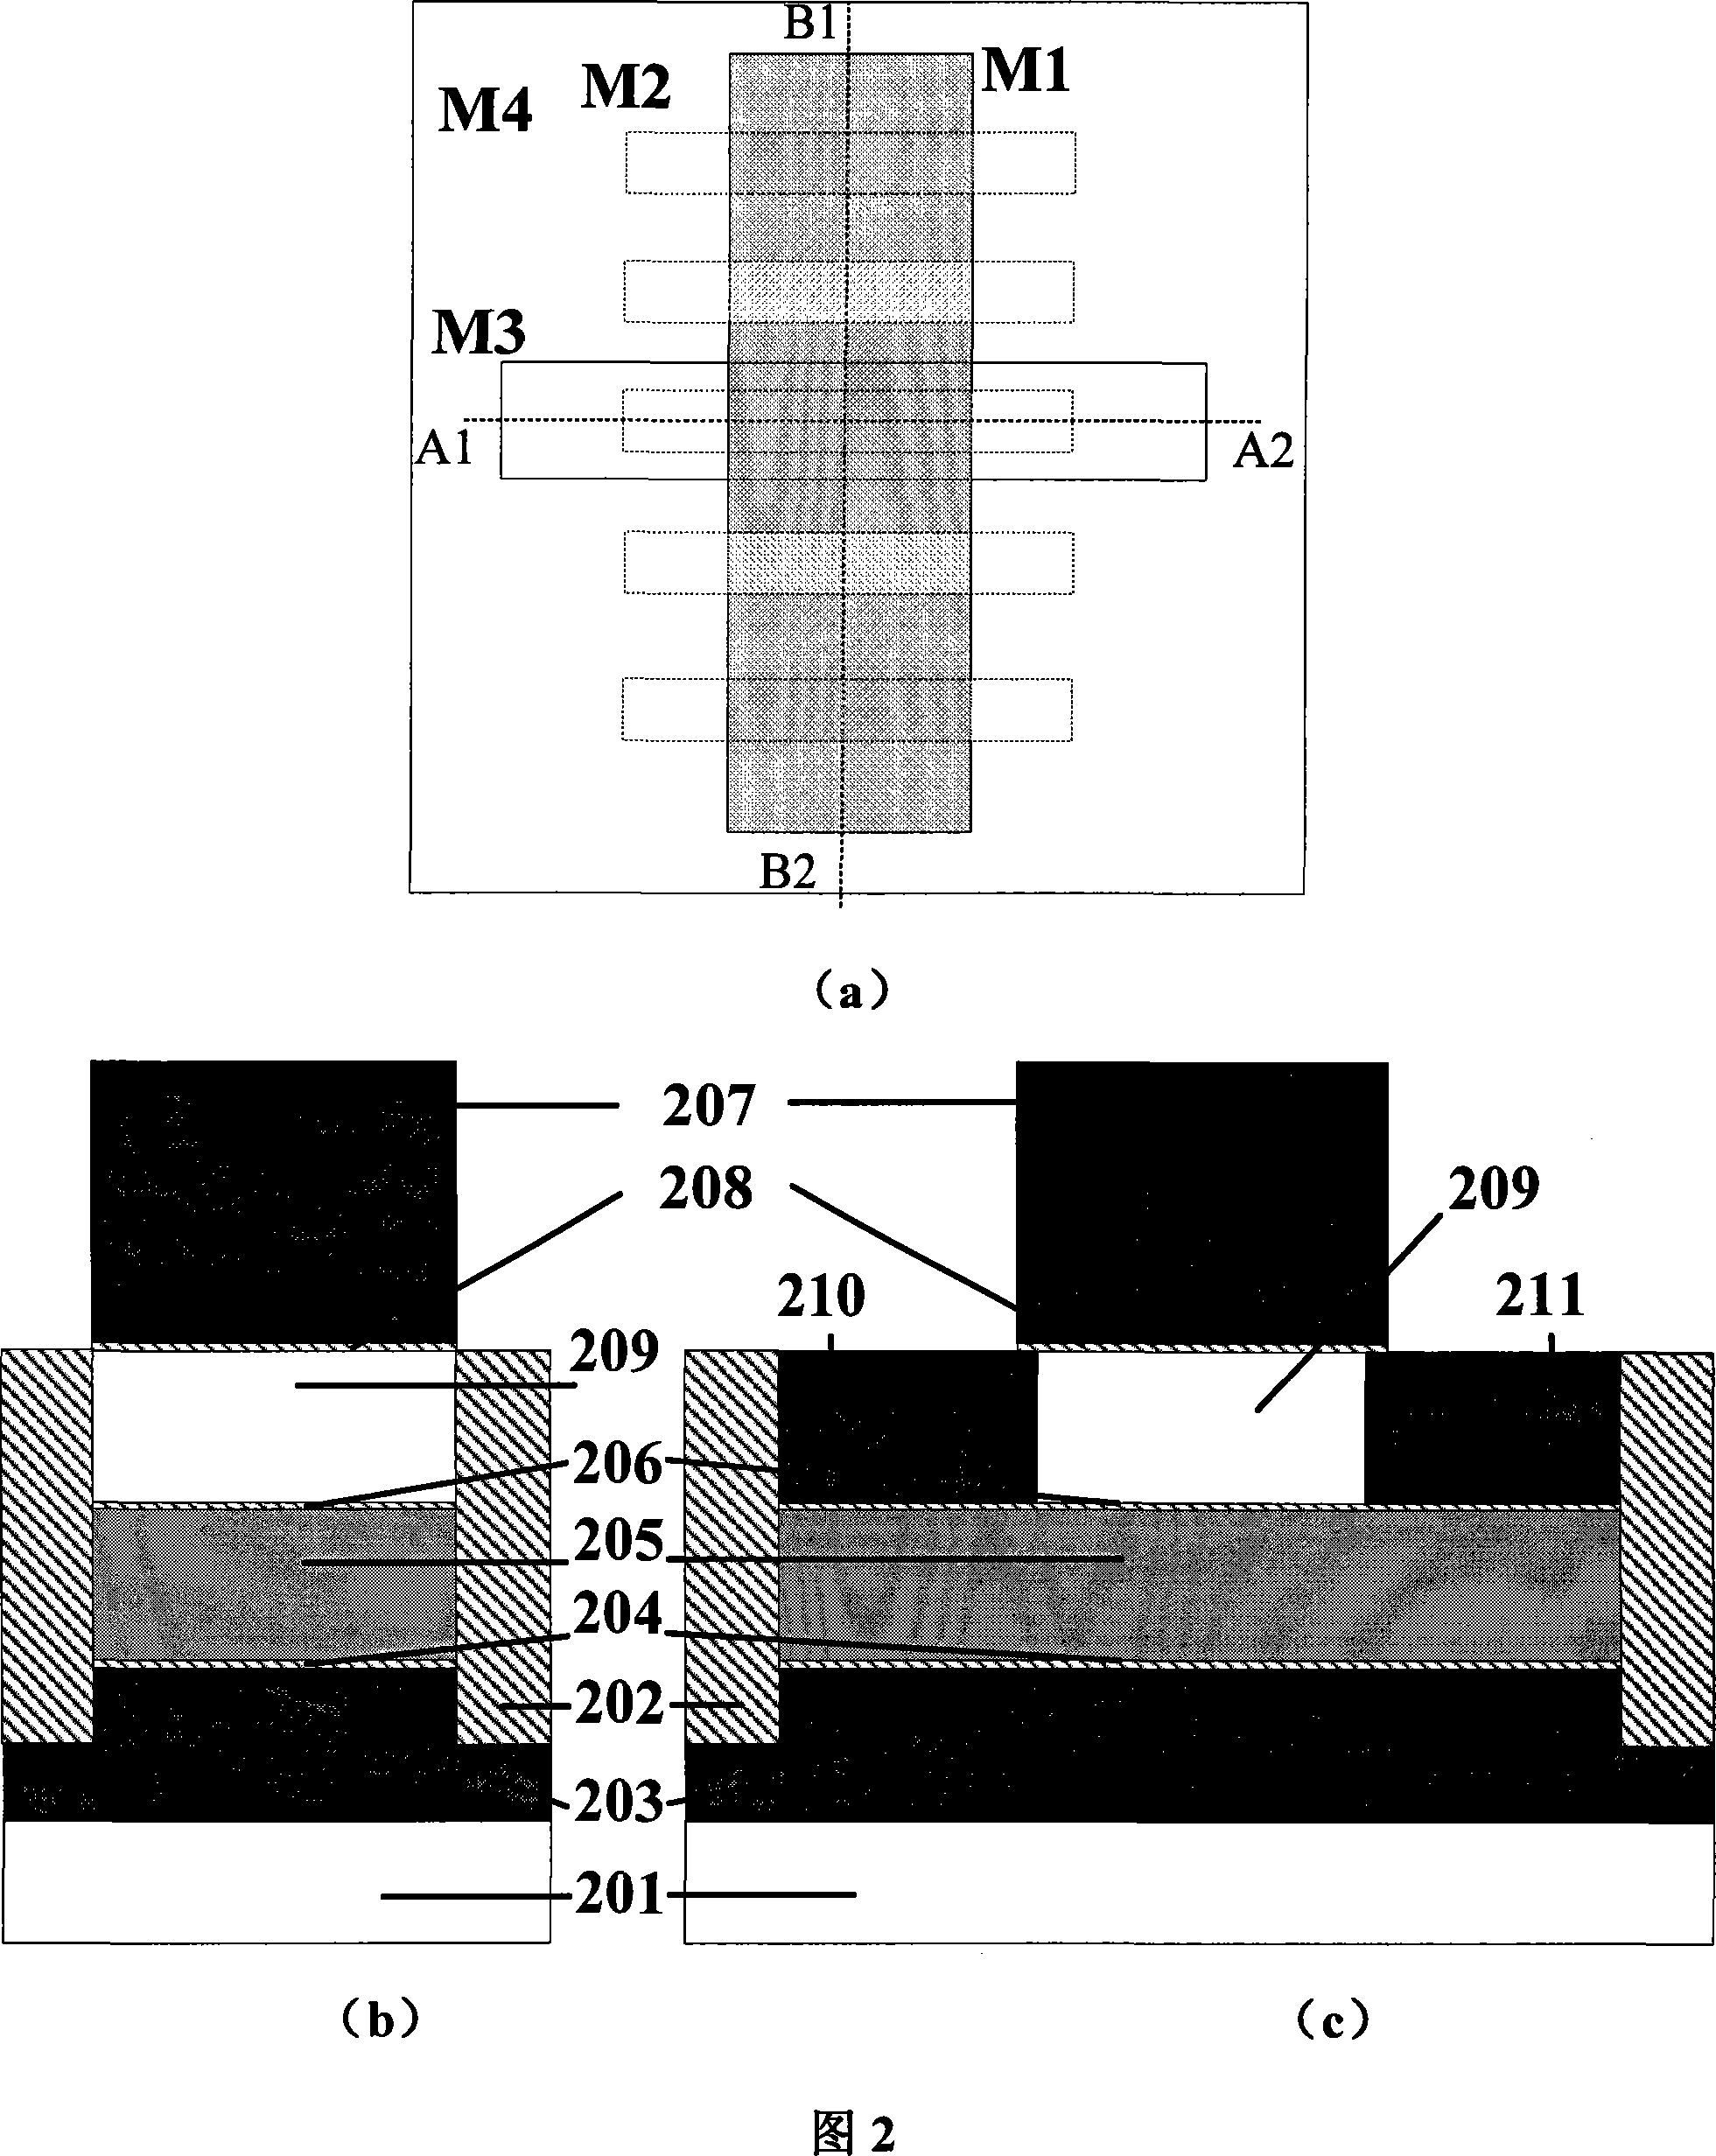 Fin channel dual-bar multi-function field effect transistor and its making method